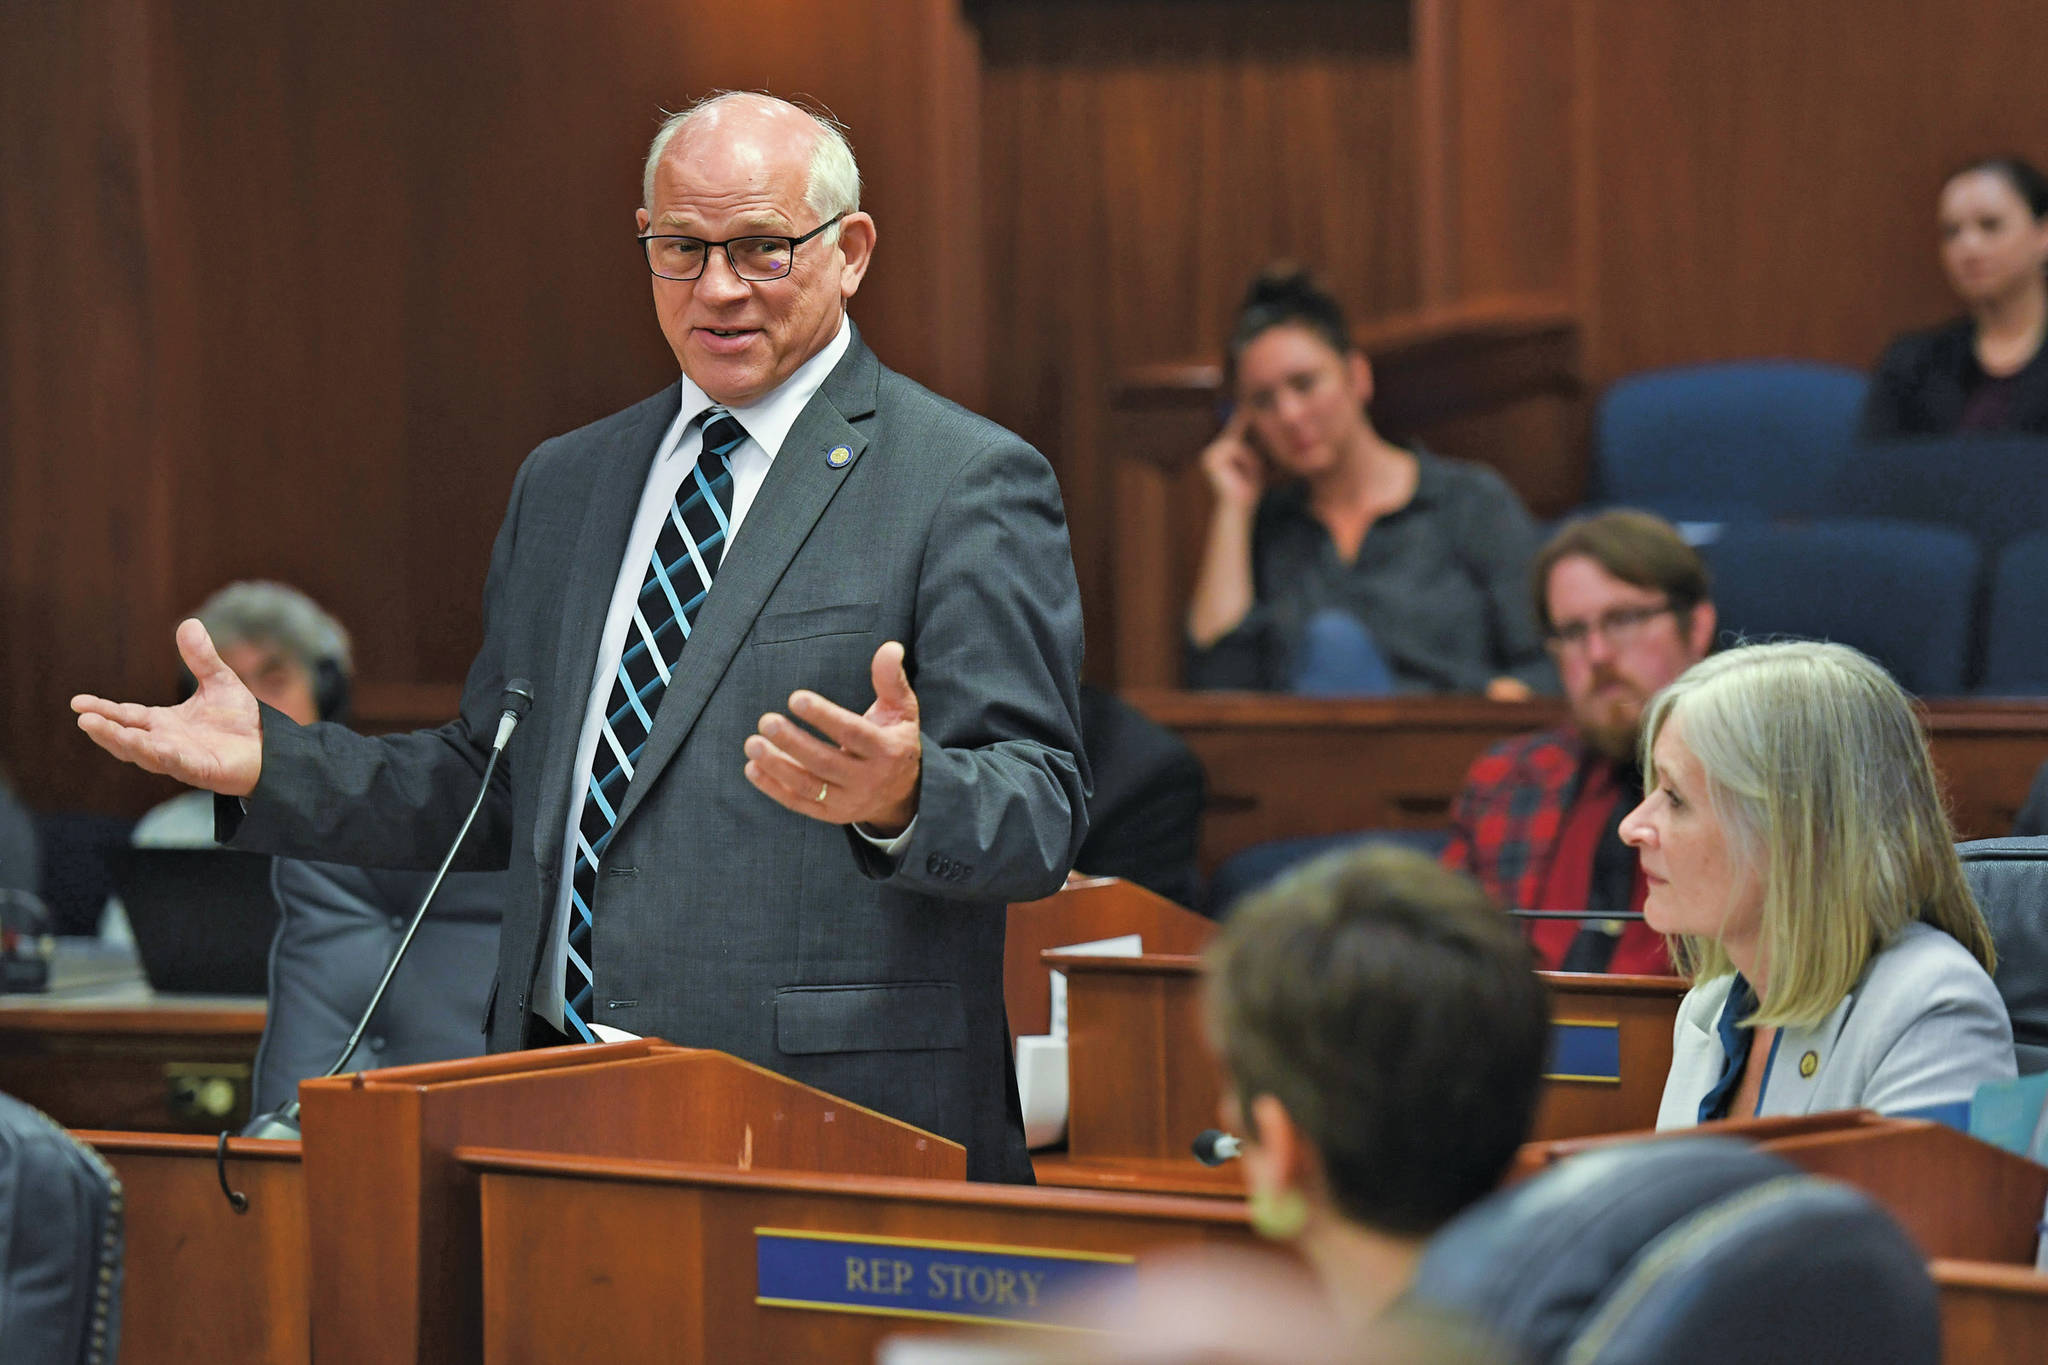 Sen. John Coghill, R-North Pole, expresses his sadness about the effect the budget will have on his community during a Joint Session of Alaska Legislature at the Capitol on Thursday, July 11, 2019. A recount has affirmed Cohhill lost a tight primary race. (Michael Penn / Juneau Empire File)